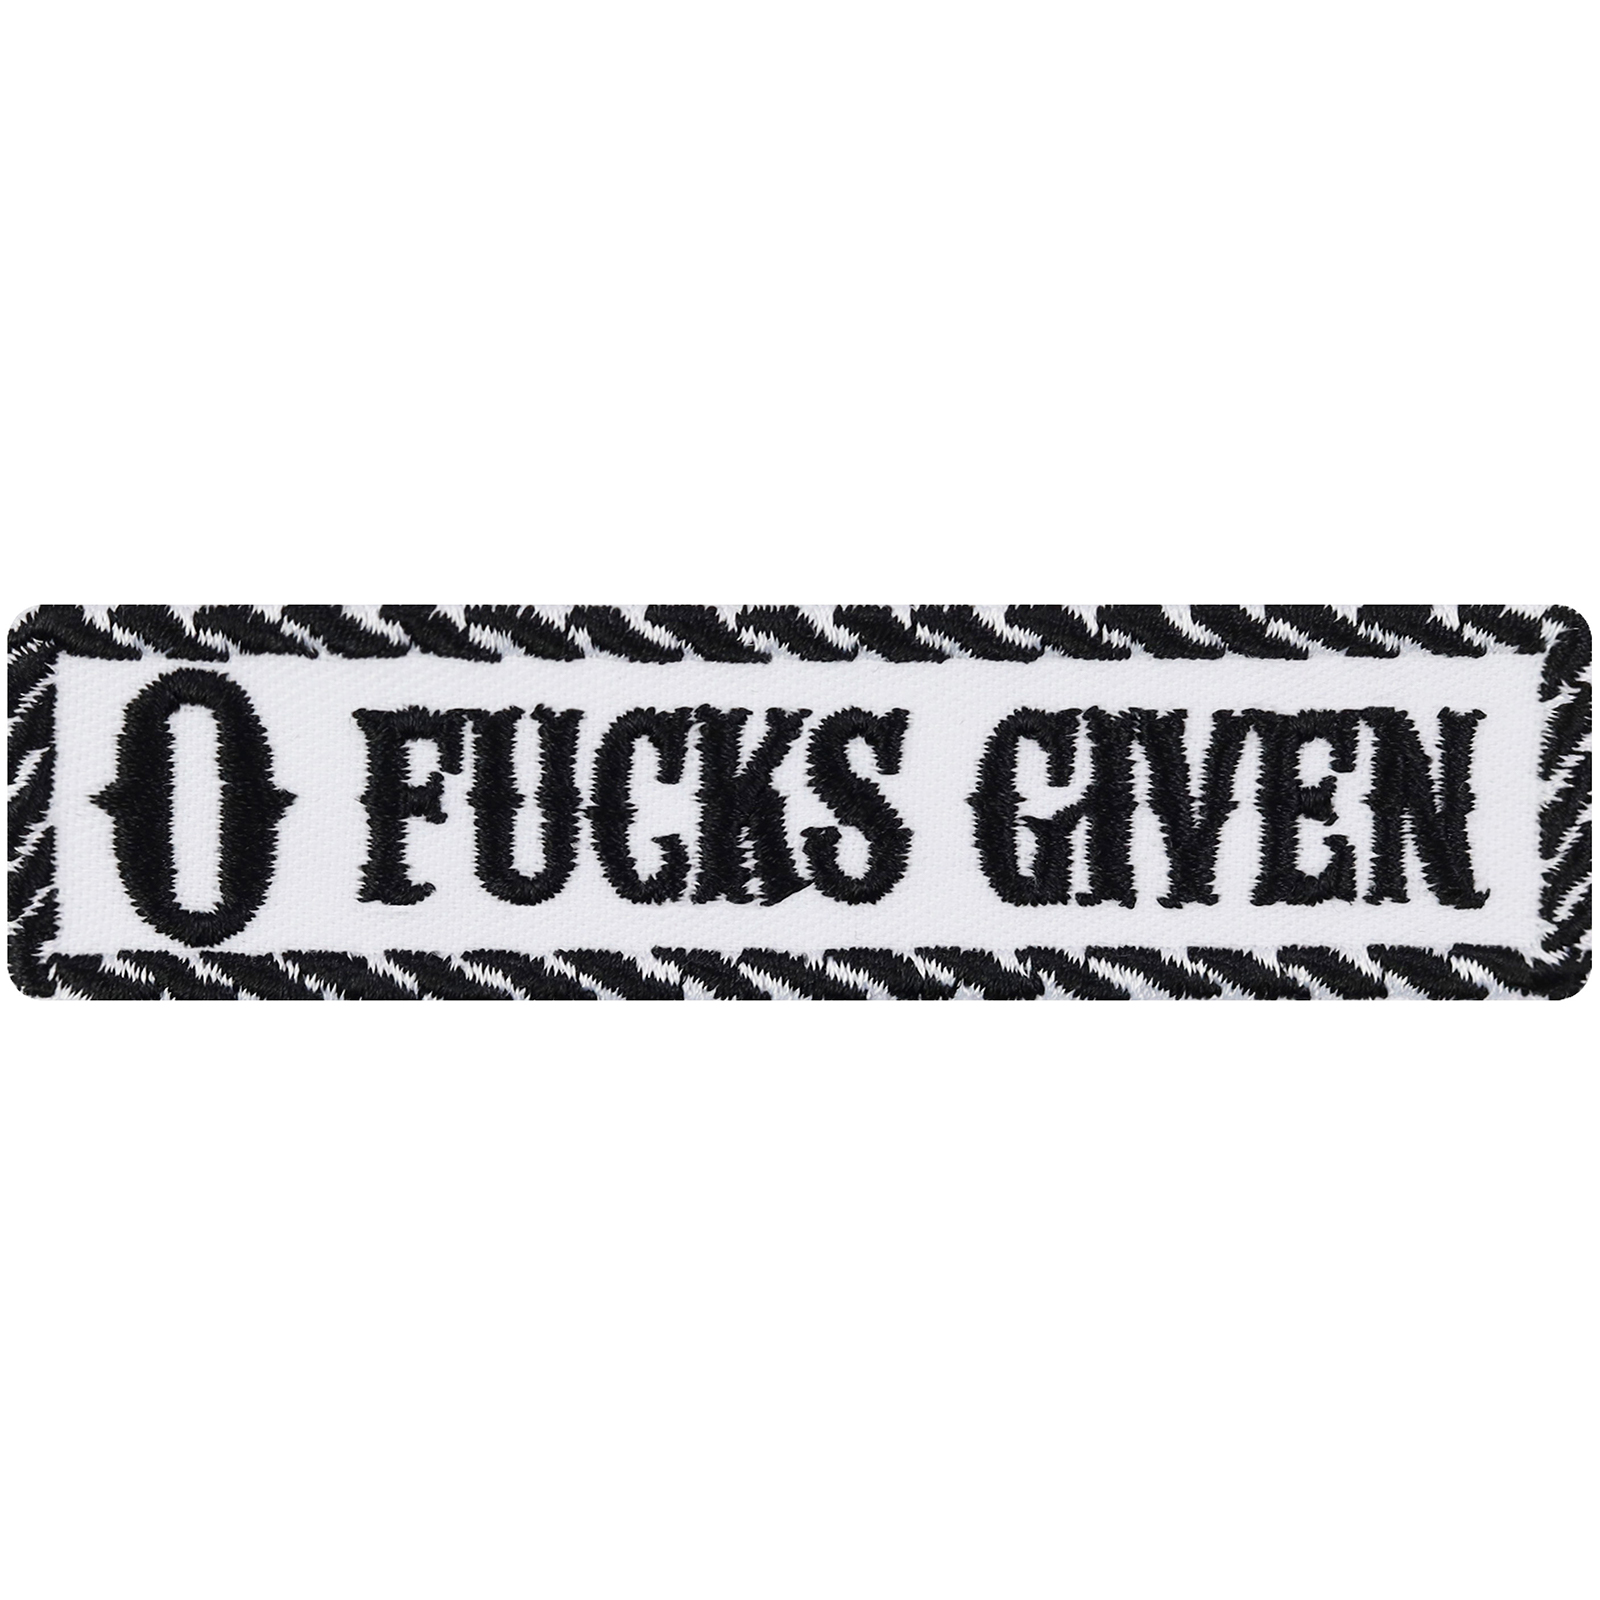 0 Fucks given - Patch